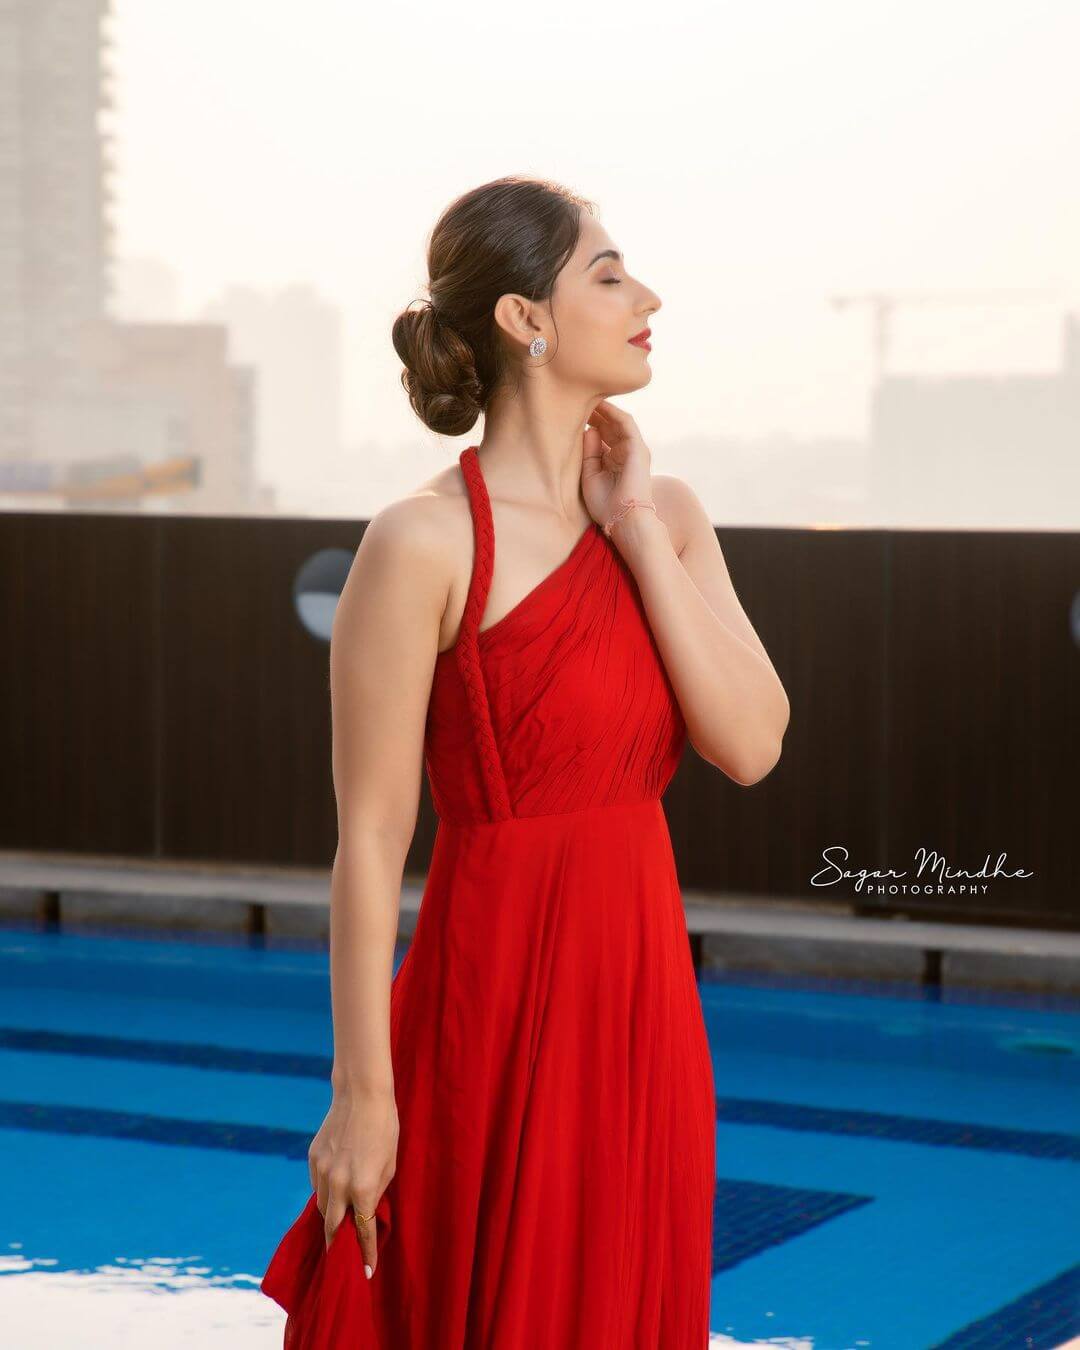 Vidhi Dreamy Look In Red One Shoulder Dress